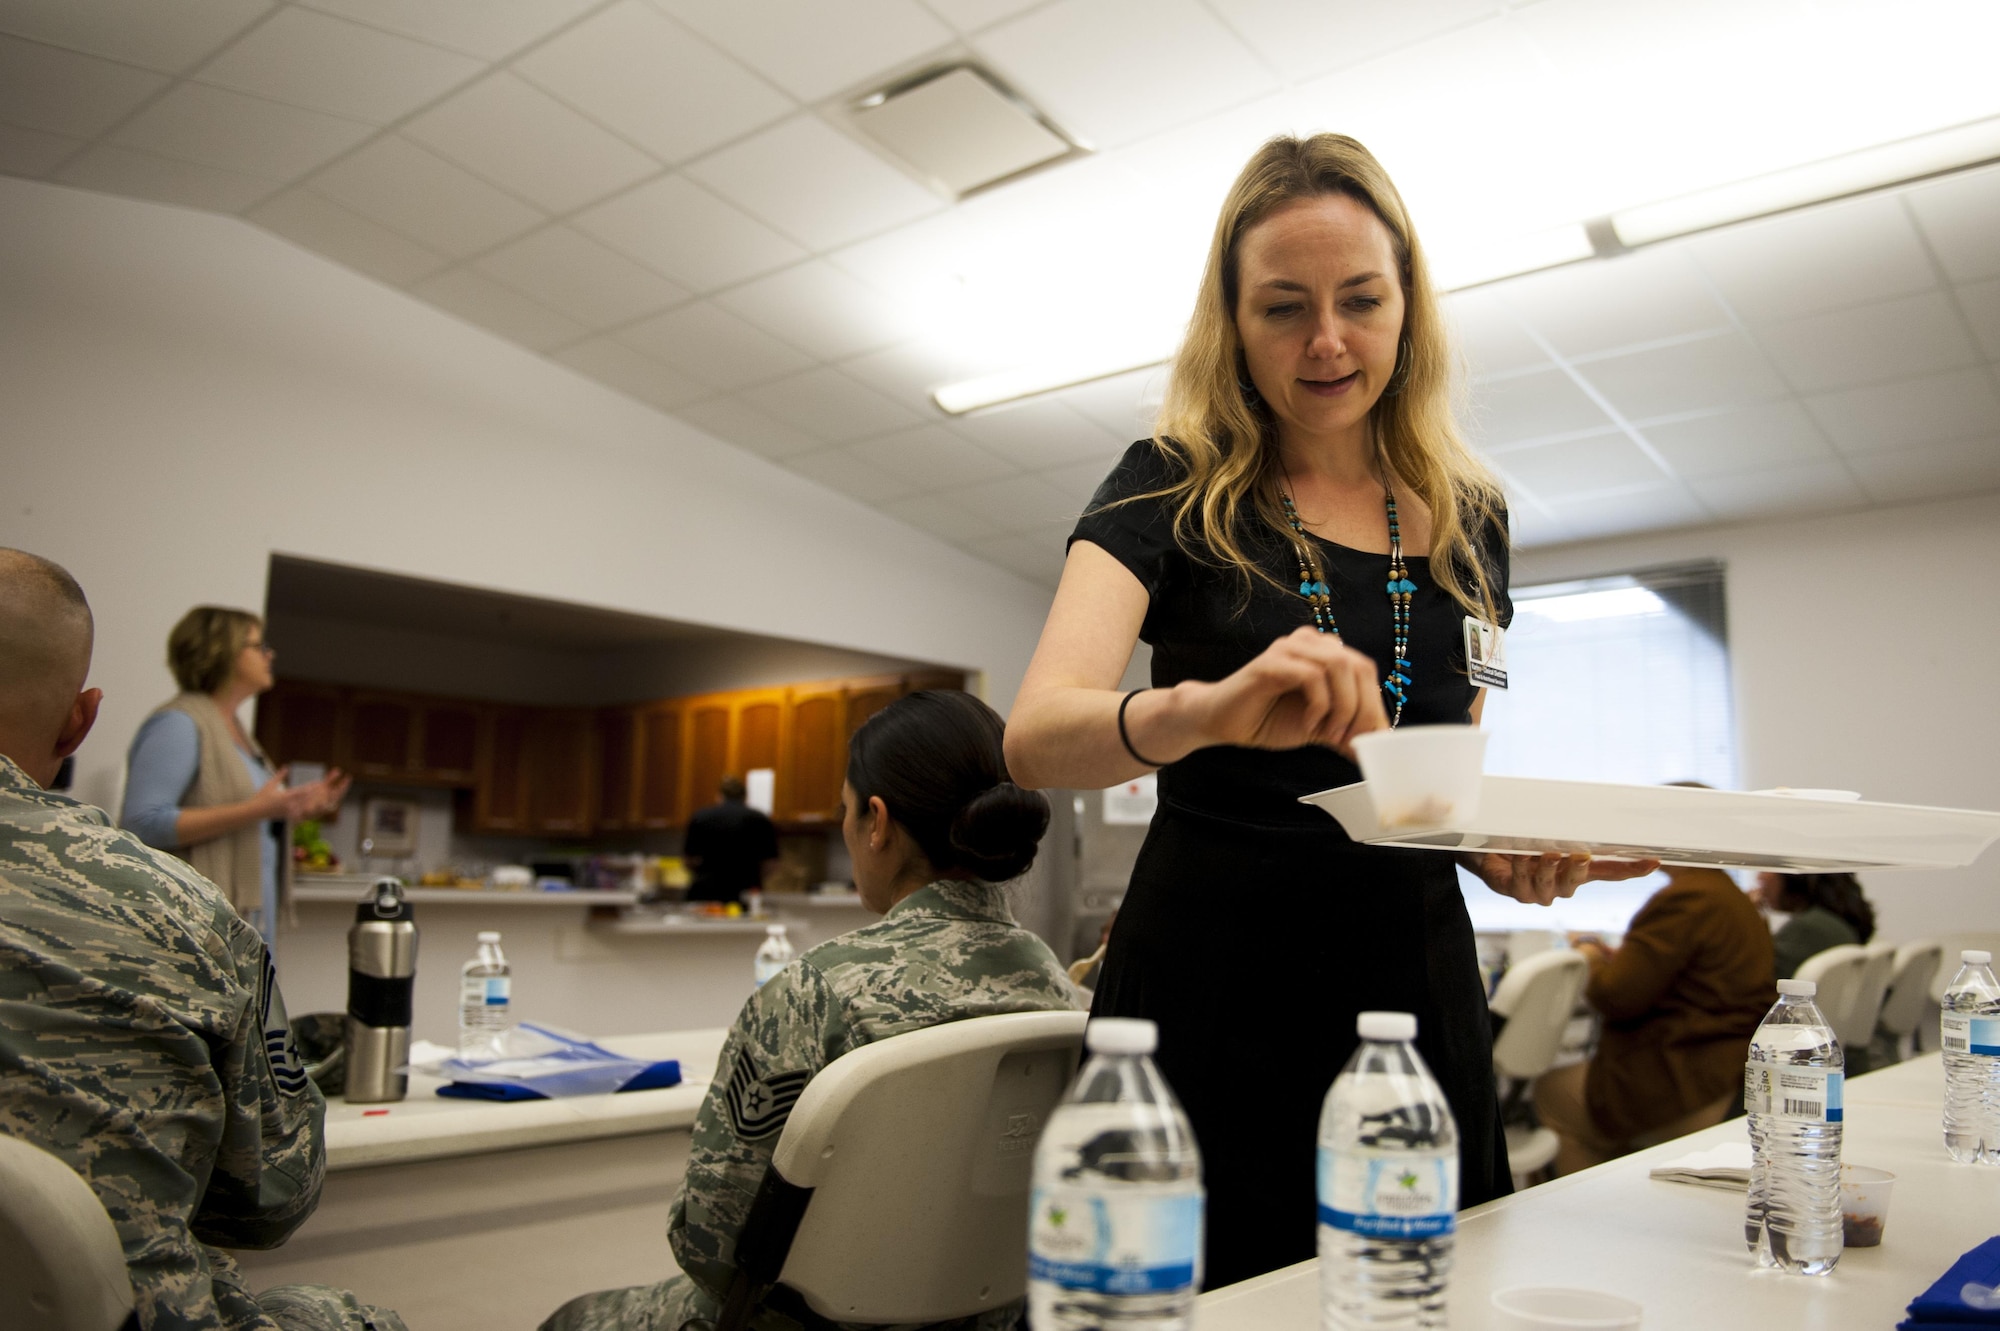 Karina Kislitsyna, San Angelo Community Medical Center chef assistant, hands out food to visitors during a food demonstration at the Taylor Chapel on Goodfellow Air Force Base, Texas, Sept. 26, 2017. The food was prepared and cooked by Marc Daniels, San Angelo Community Medical Center executive chef. (U.S. Air Force photo by Senior Airman Scott Jackson)